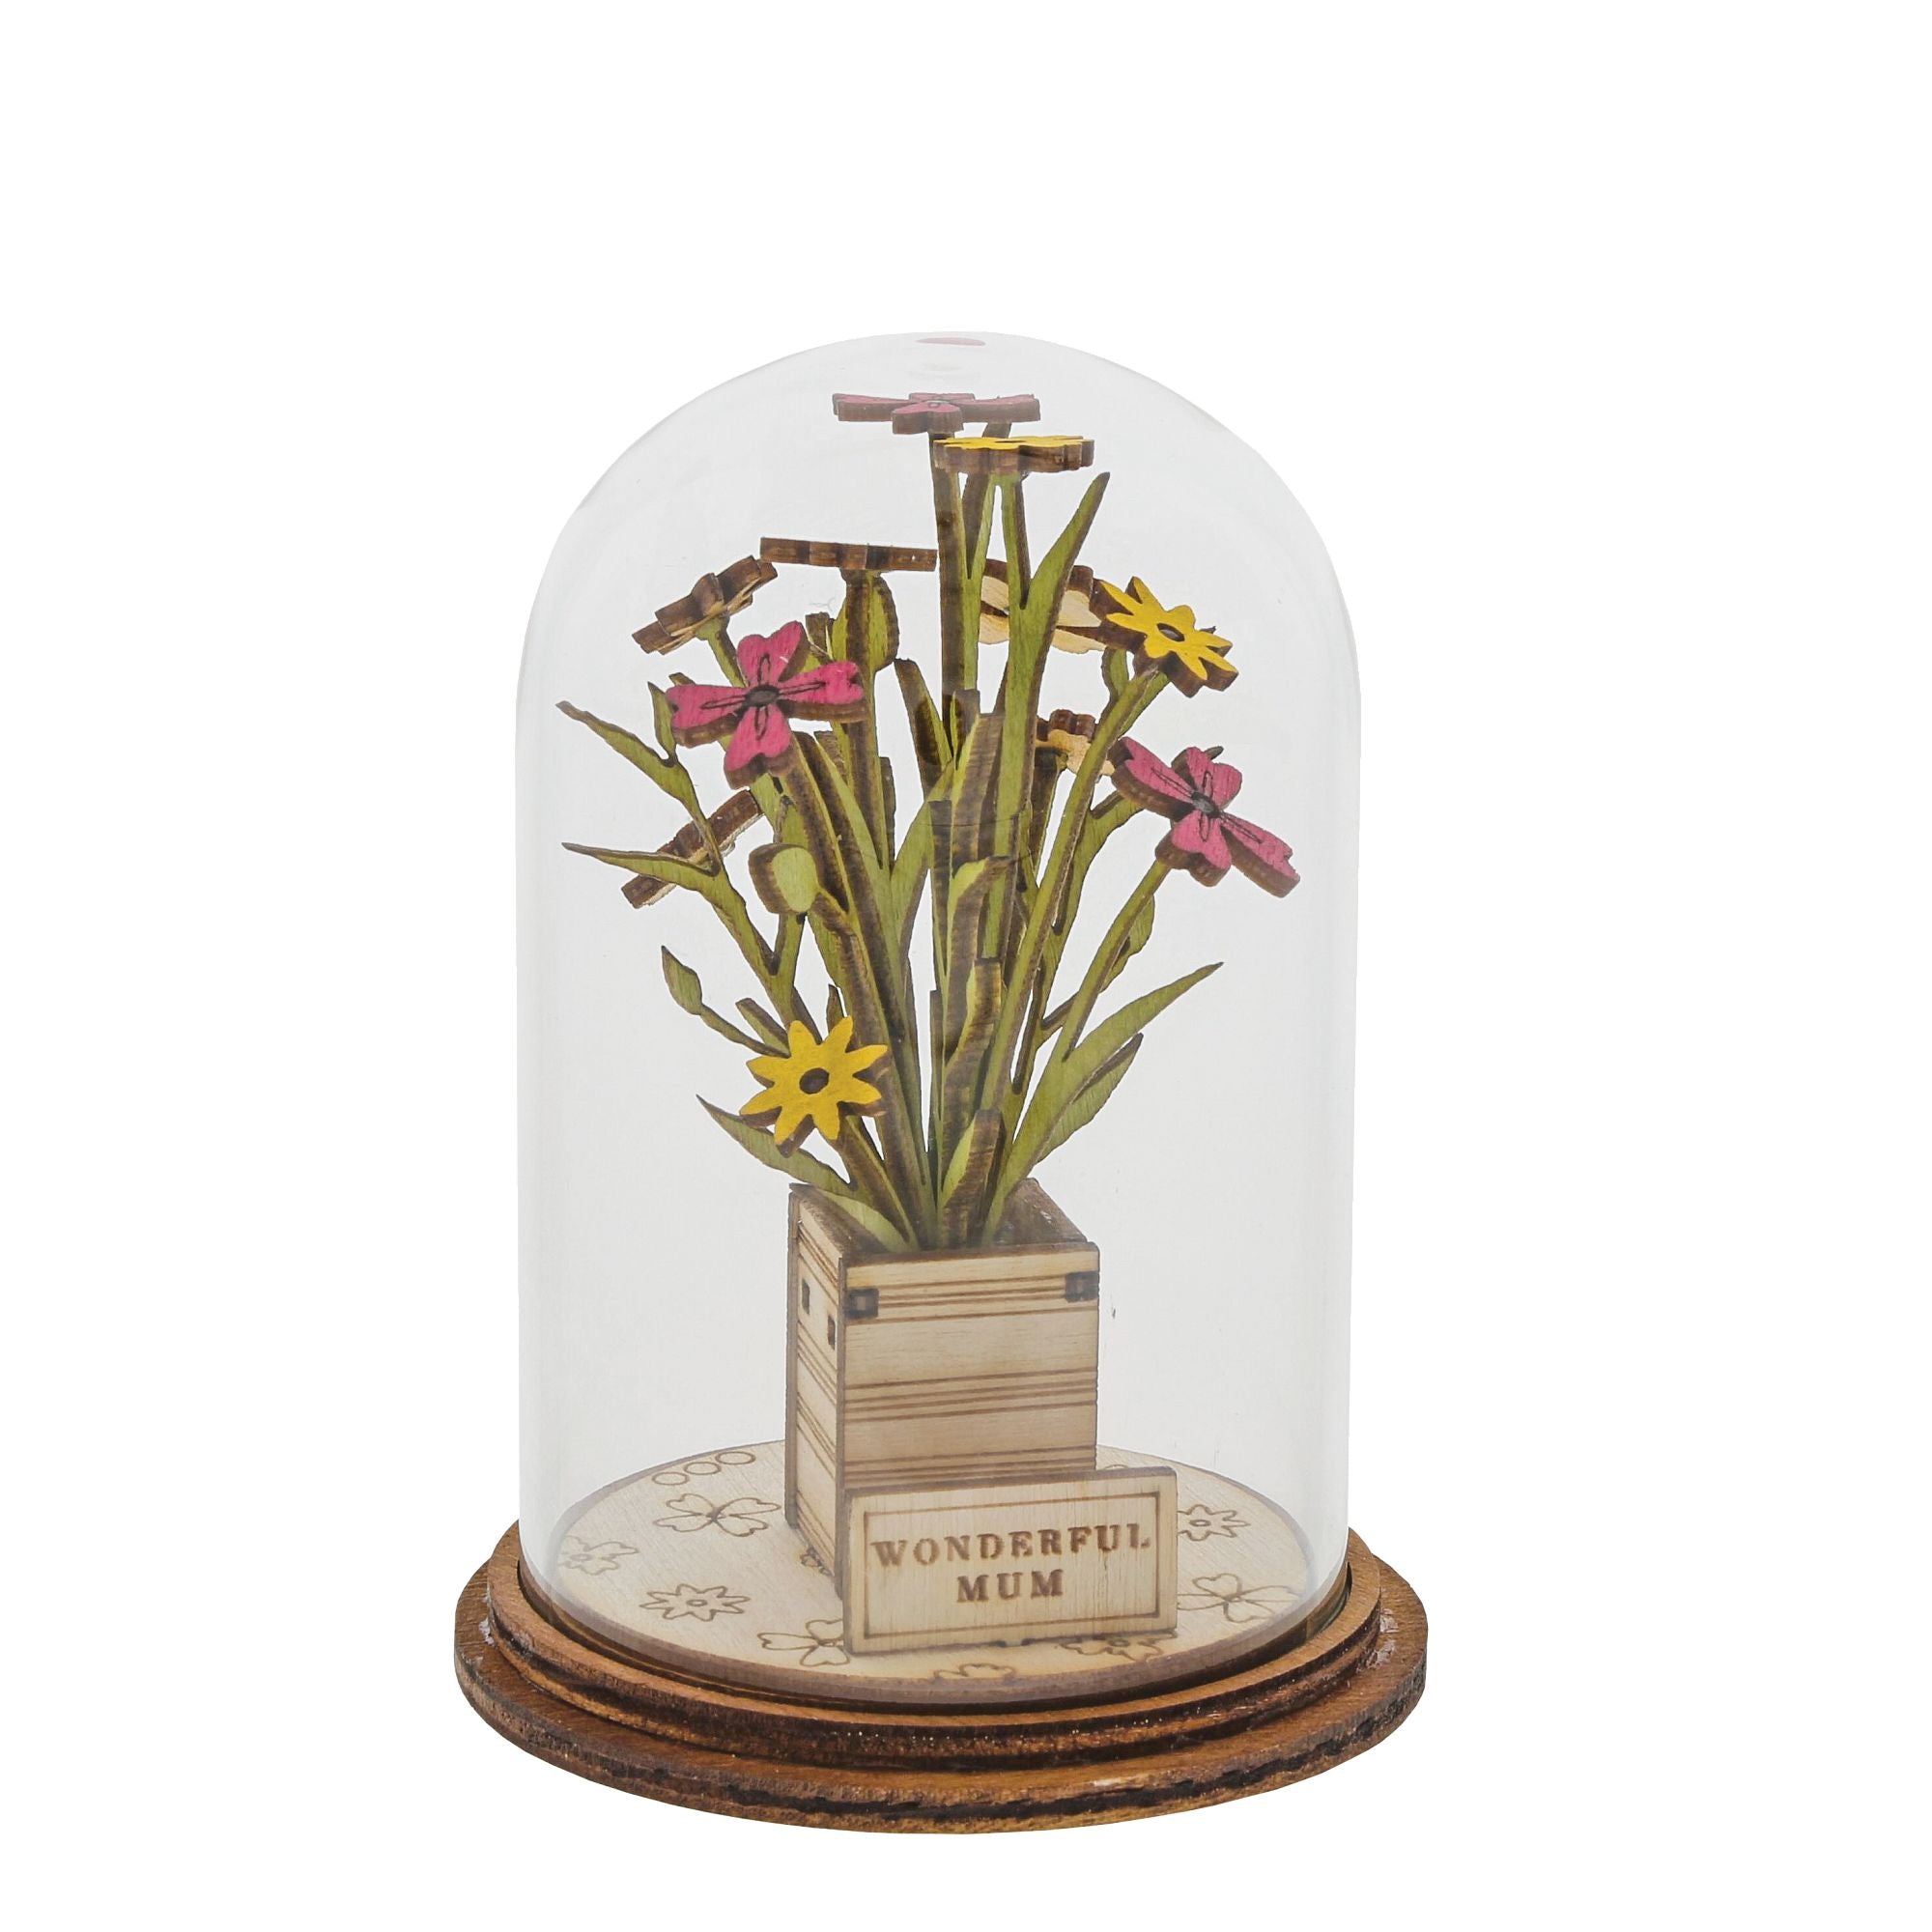 Tiny Town Wonderful Mum Flower Figurine - Kloche | More Than Just A Gift